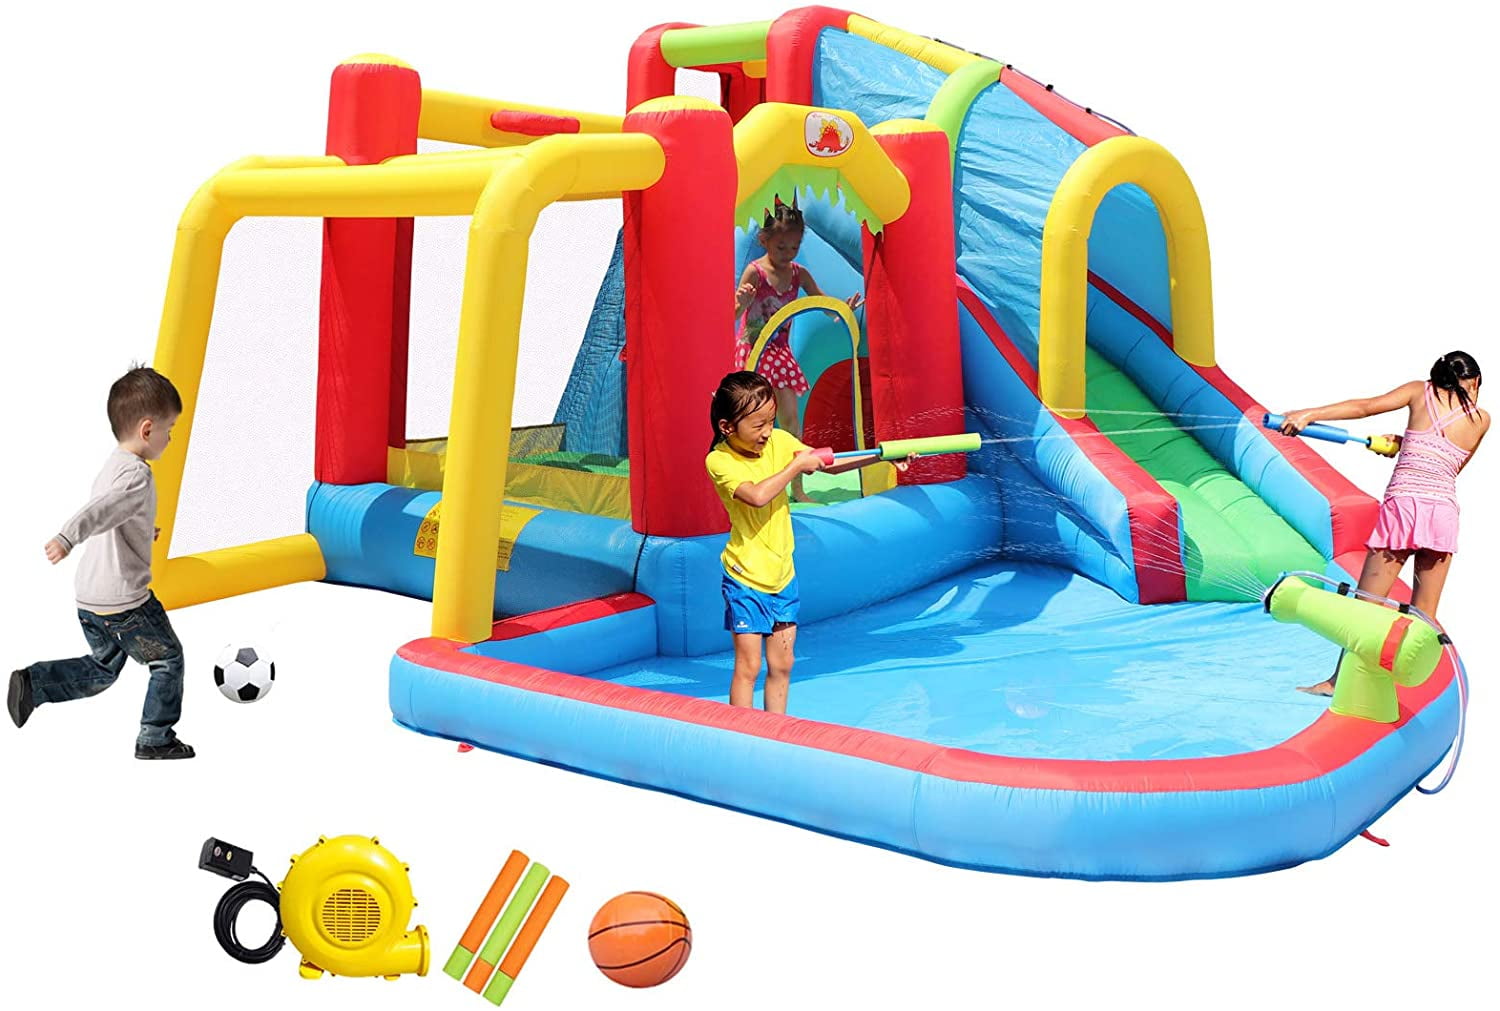 Kids Bounce House with Blower JOOLOOG Inflatable Water Slides Climbing Wall Basketball Scoop and Water Cannon with 450W Air Blower Blow Up Water Slides for Kids Backyard Splashing Pool 